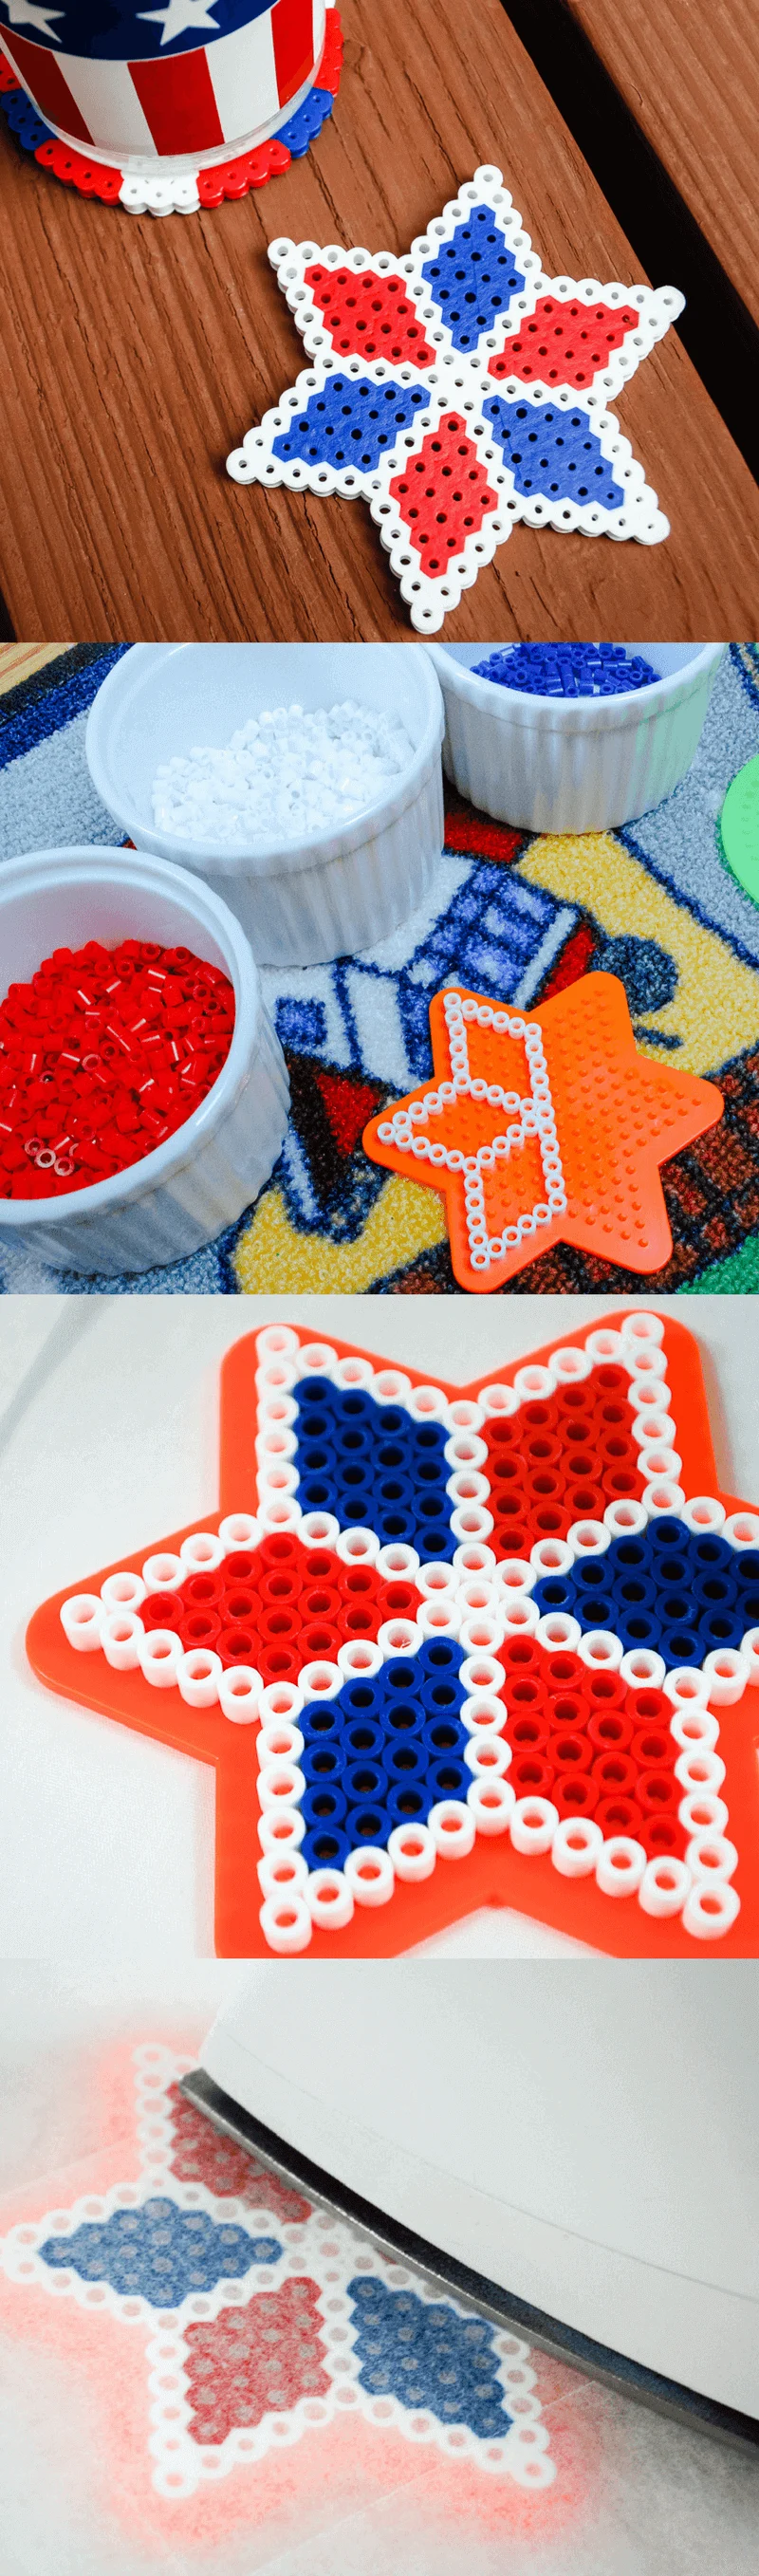 Easy DIY Perler bead coasters for Fourth of July. Makes a fun and useful kid's summer craft activity!